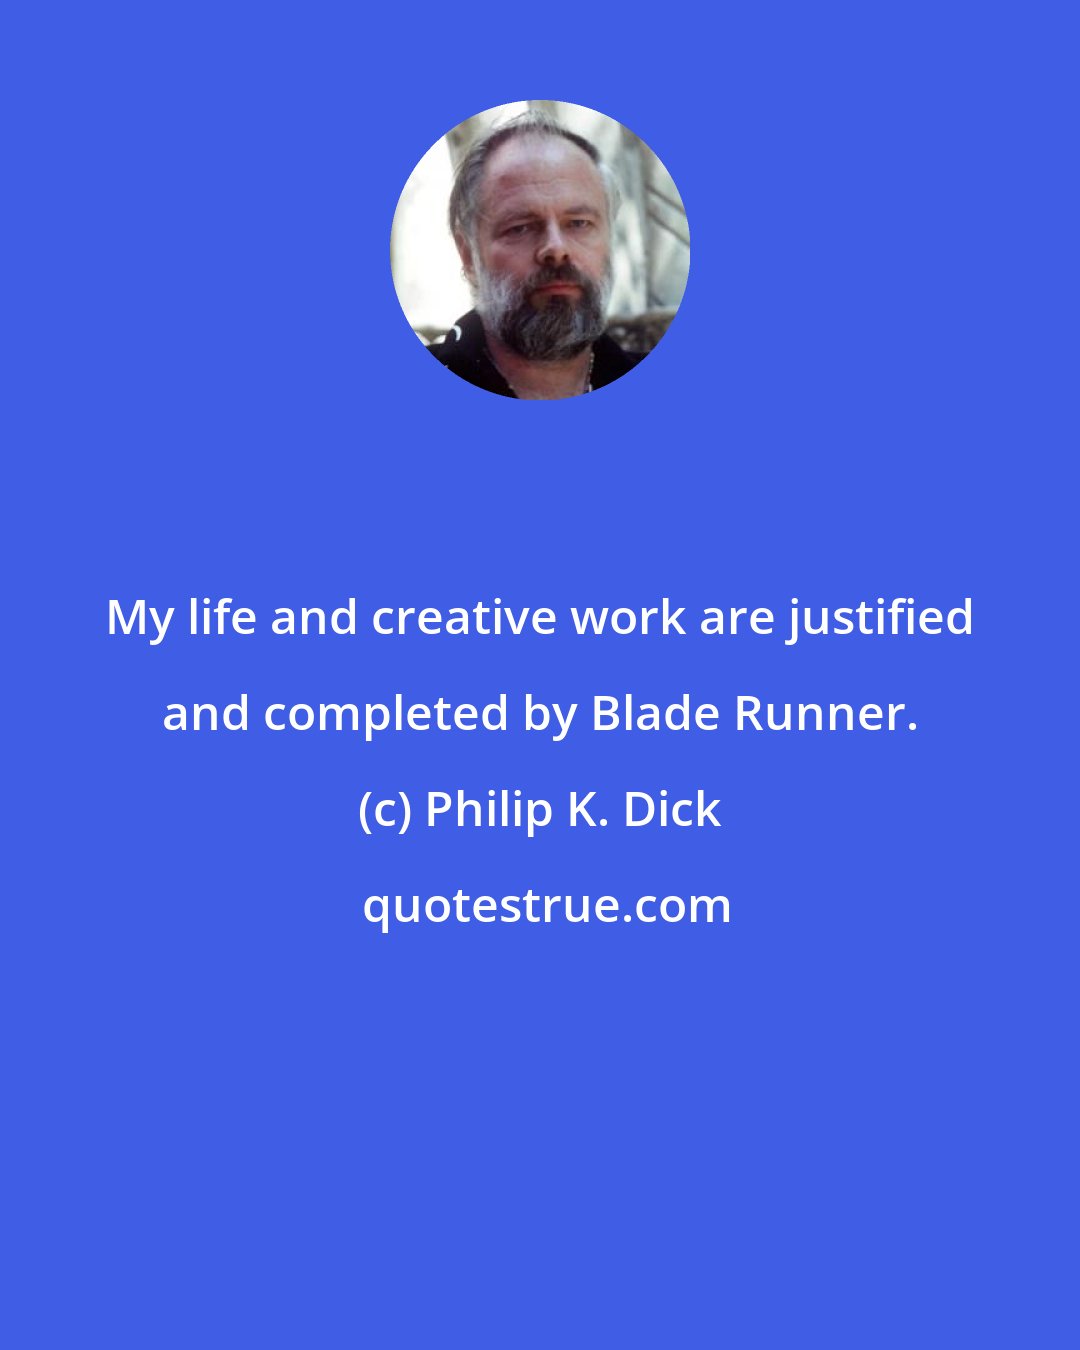 Philip K. Dick: My life and creative work are justified and completed by Blade Runner.